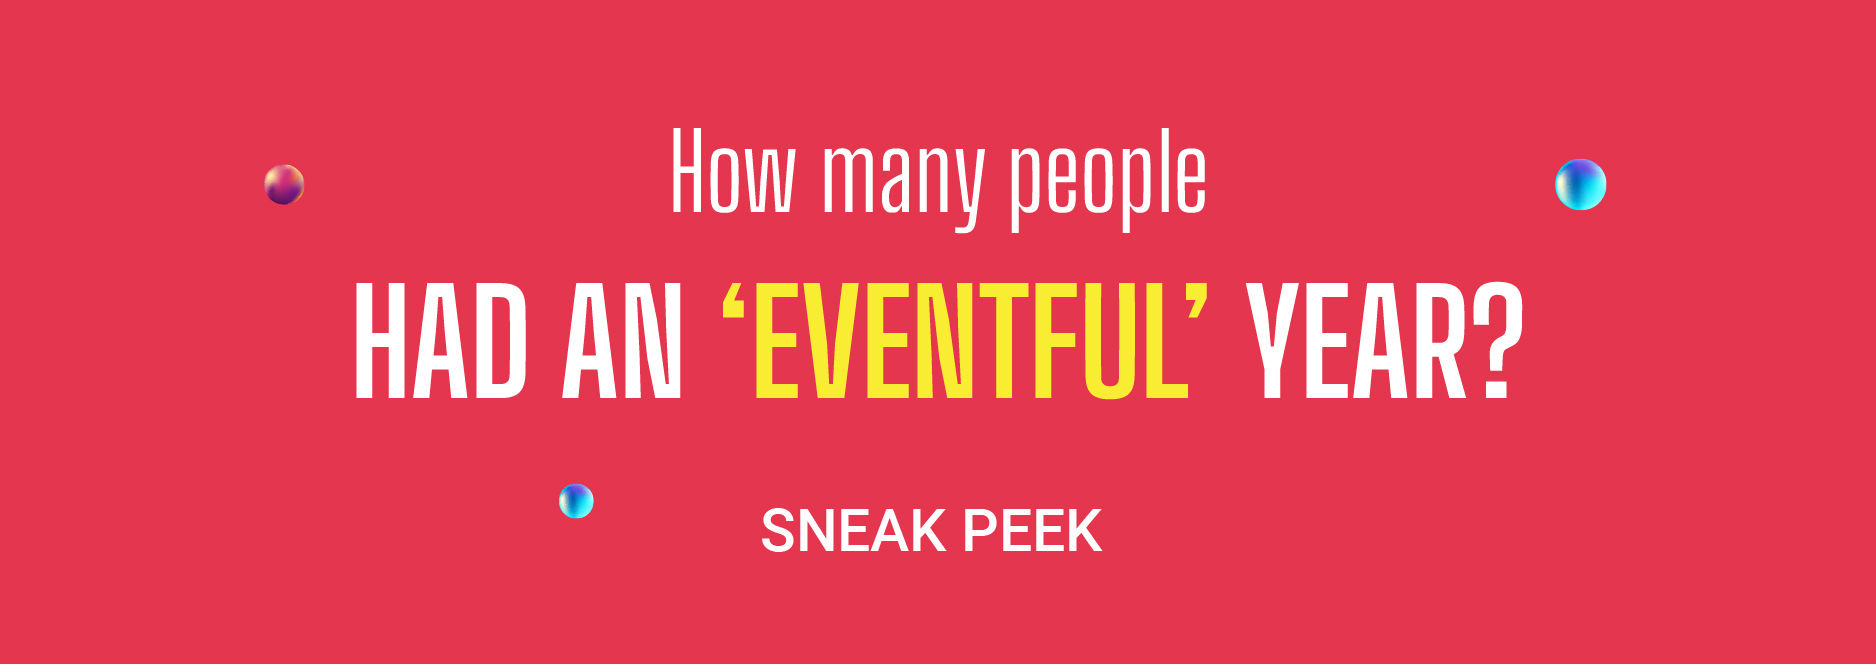 How many people had an 'eventful' year?